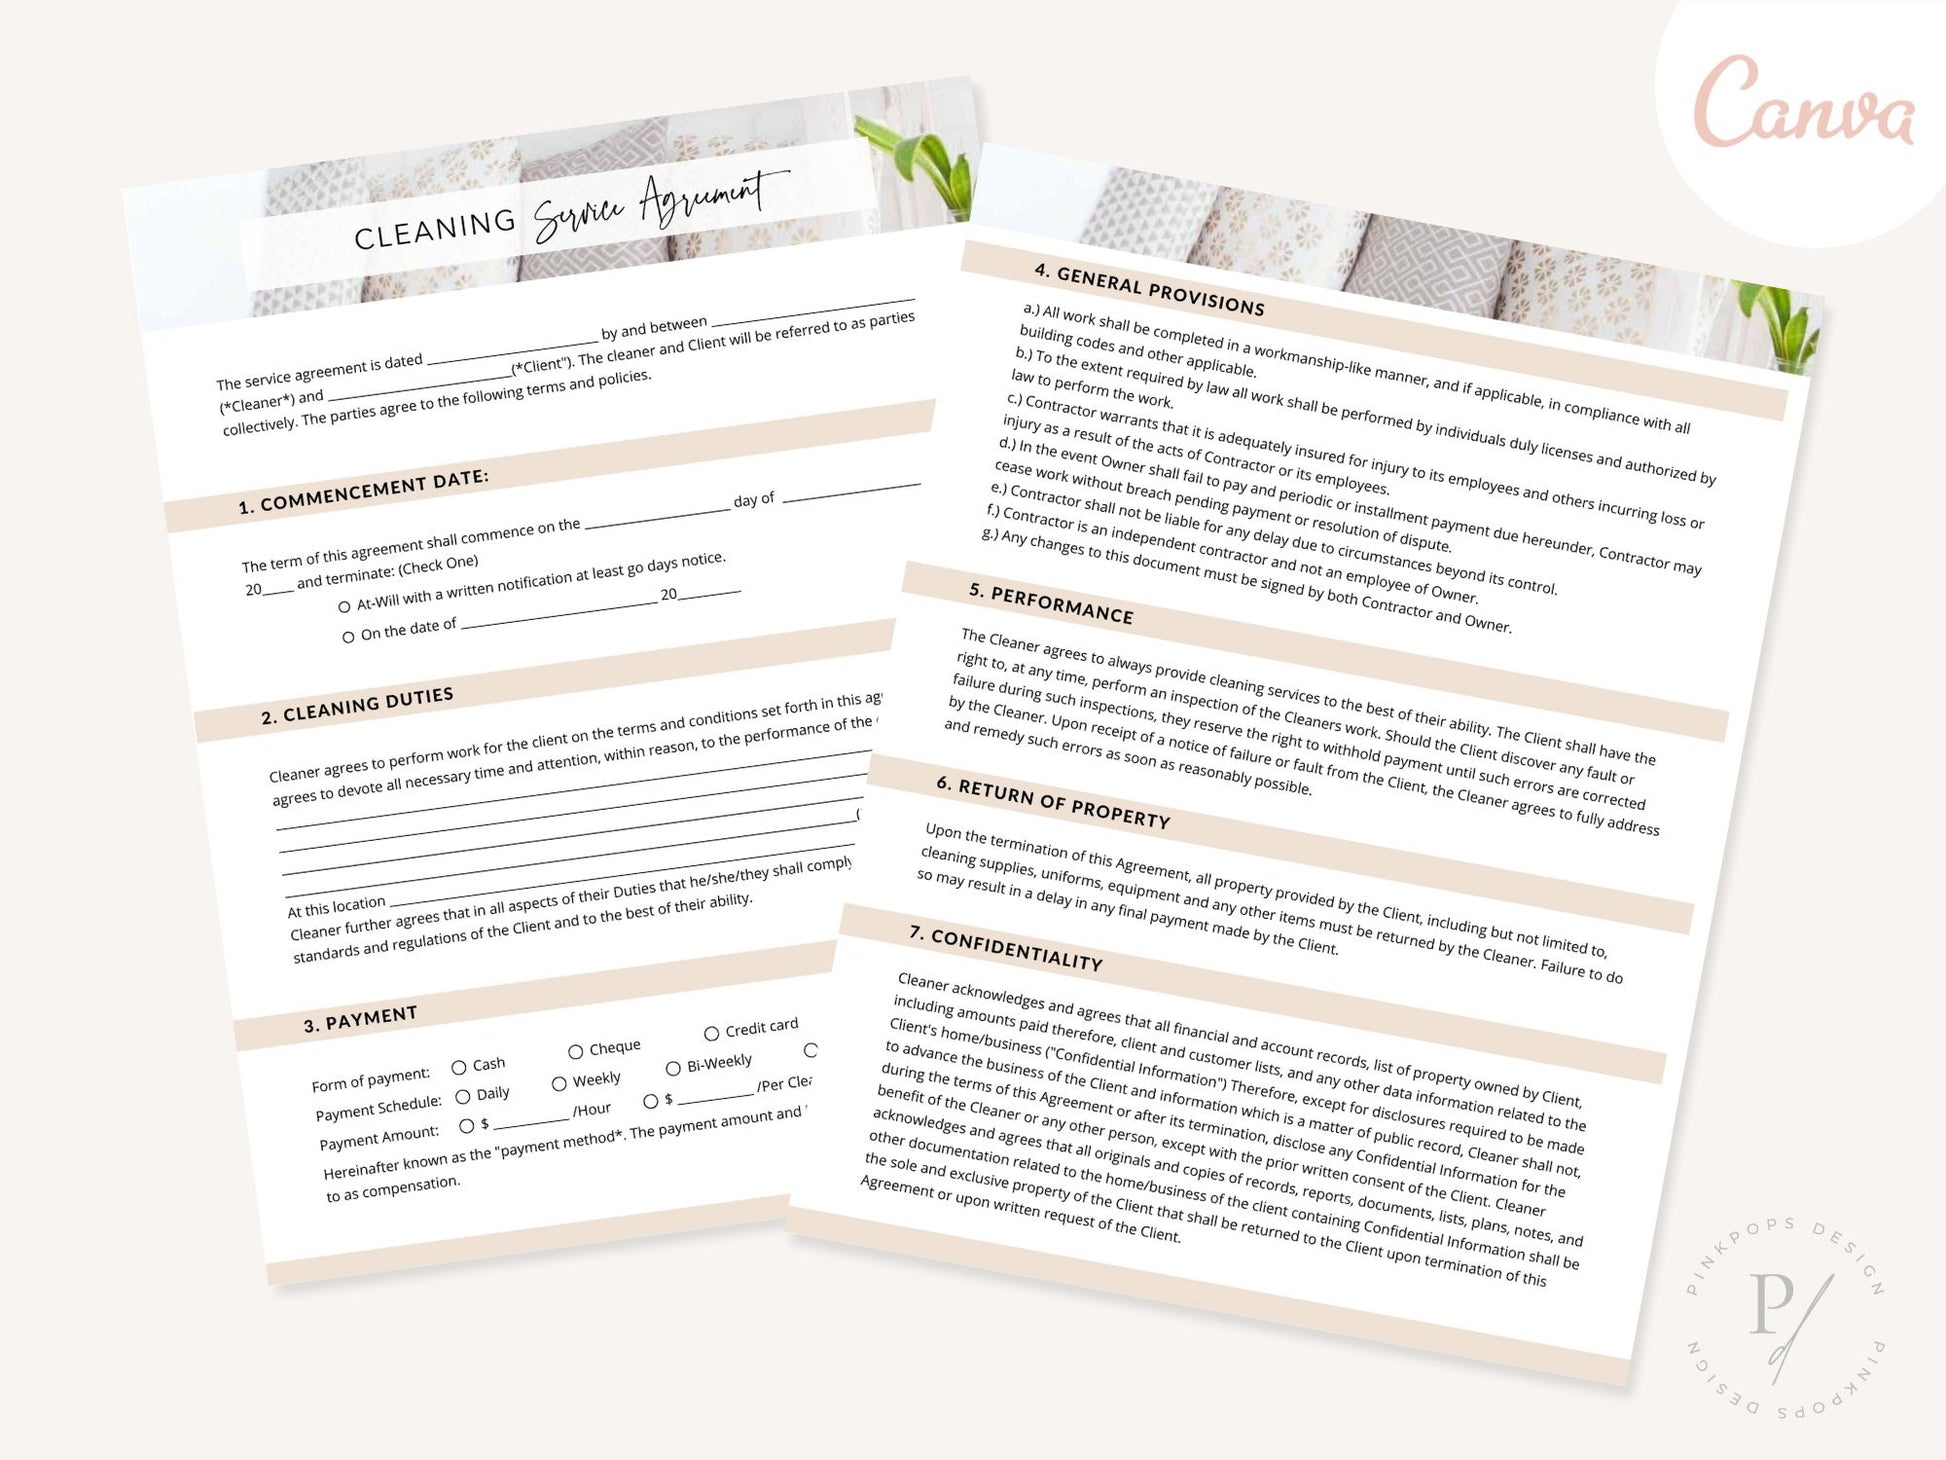 Cleaning Service Agreement - Editable template for establishing clear terms and expectations, fostering a transparent and professional relationship between your cleaning business and clients.